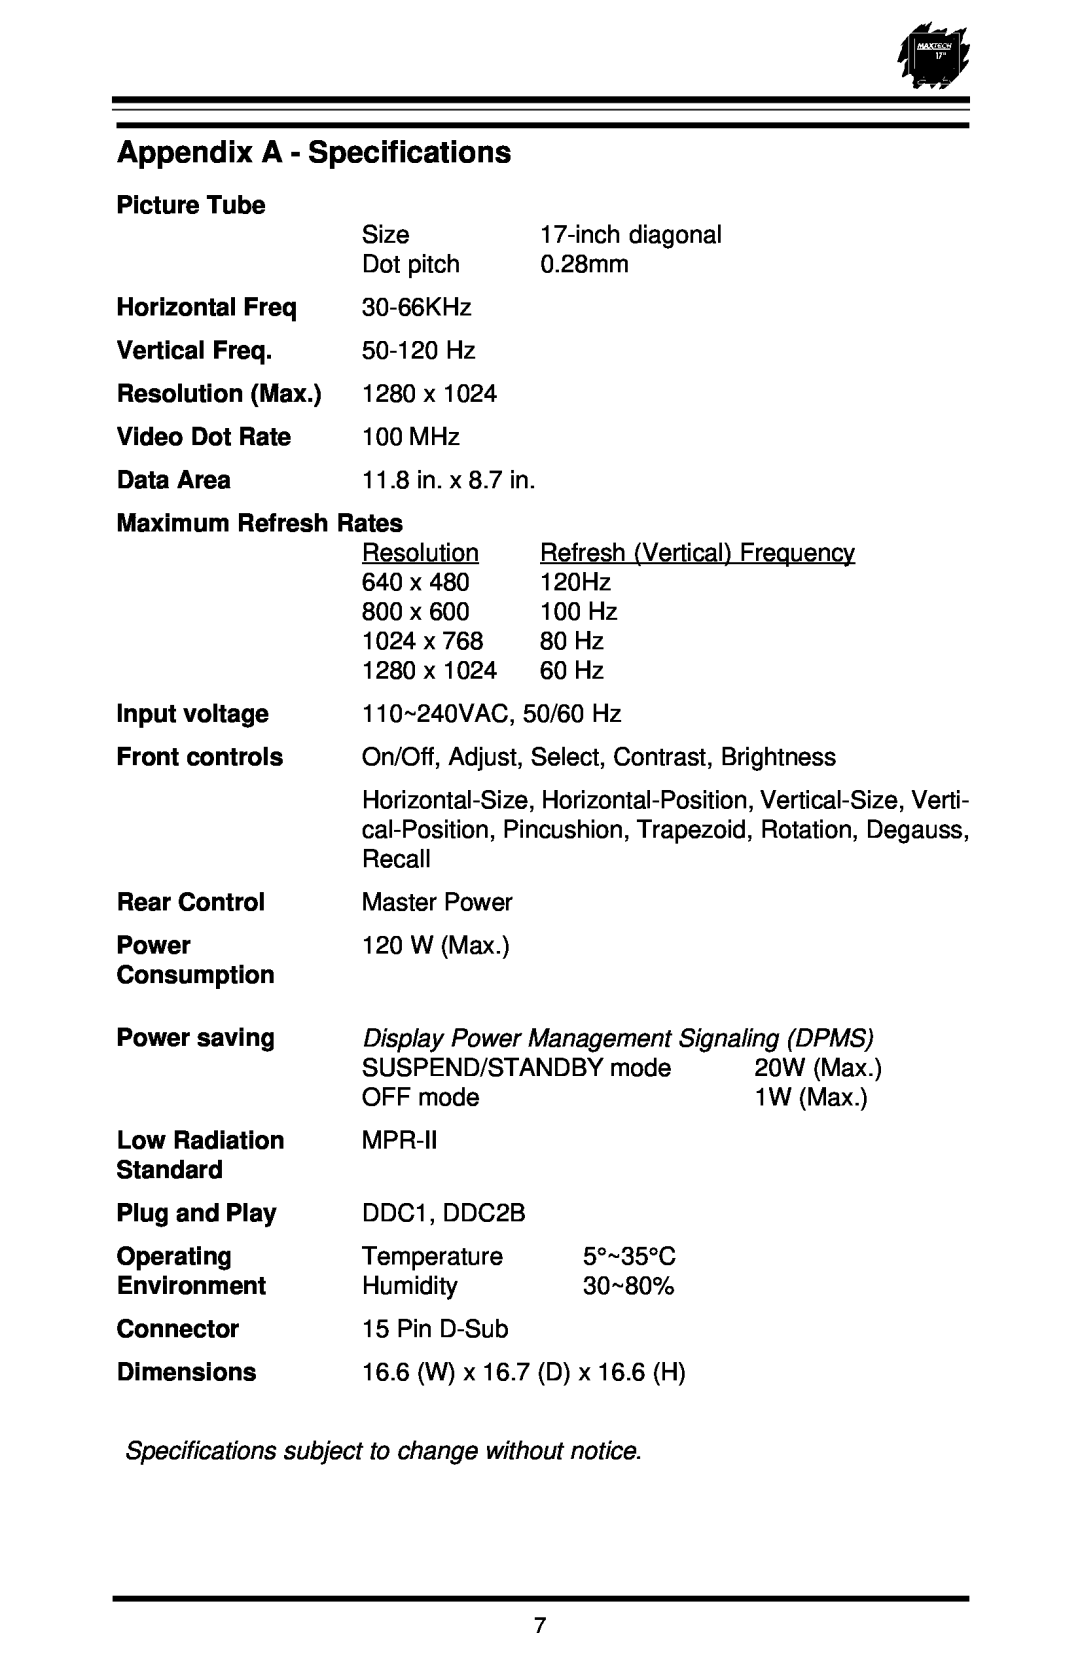 MaxTech XT-7871 user manual Appendix A - Specifications, Display Power Management Signaling DPMS 